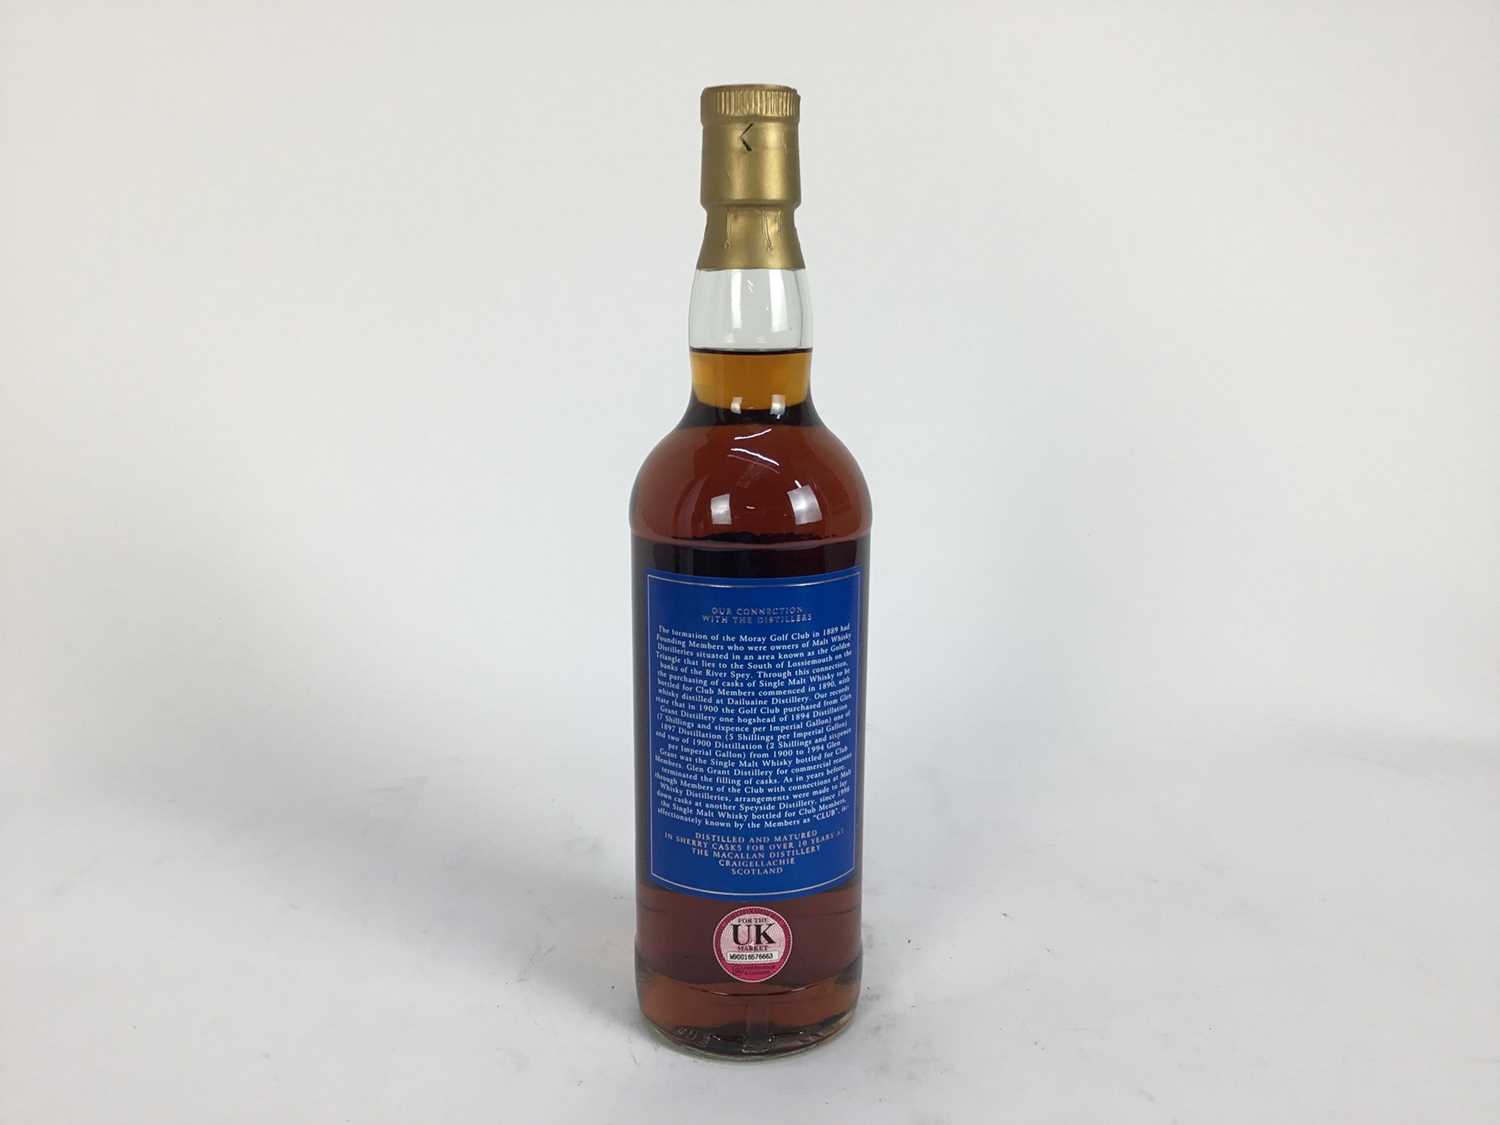 One bottle of Moray Golf Club 1889 single Speyside Malt Scotch Whisky, 10 years old, 70cl. - Image 4 of 4